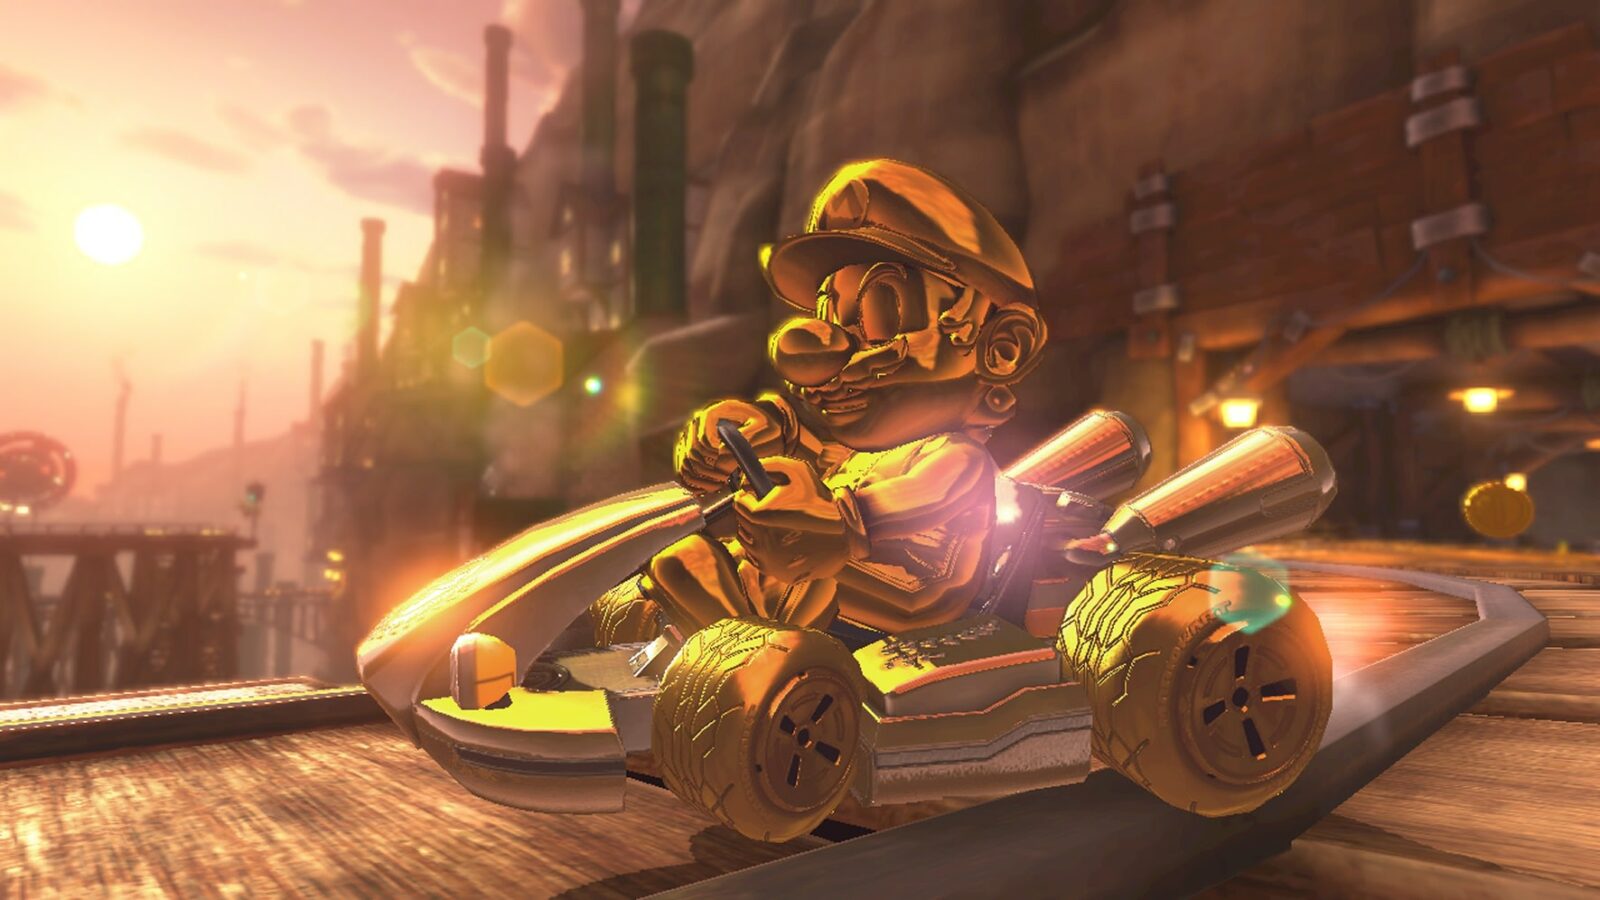 The best Mario Kart 8 build to win all your